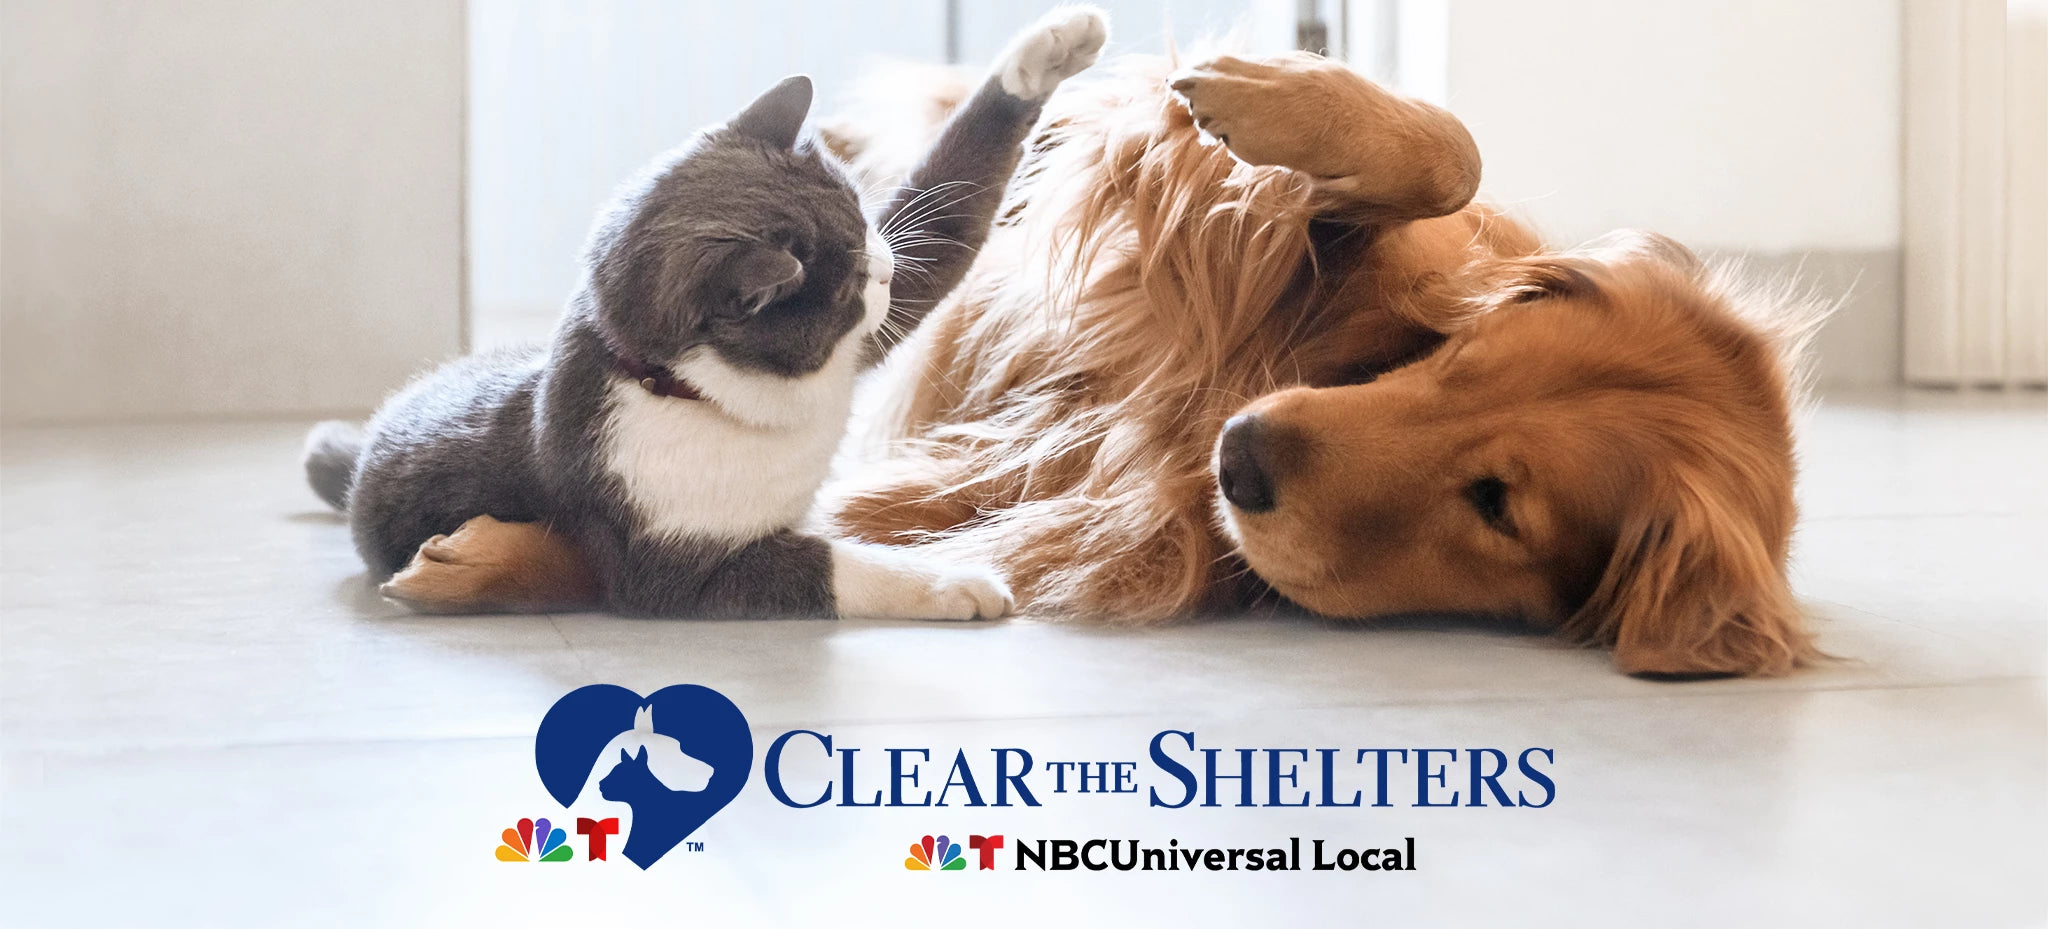 Clear The Shelters  The Animal Rescue Site